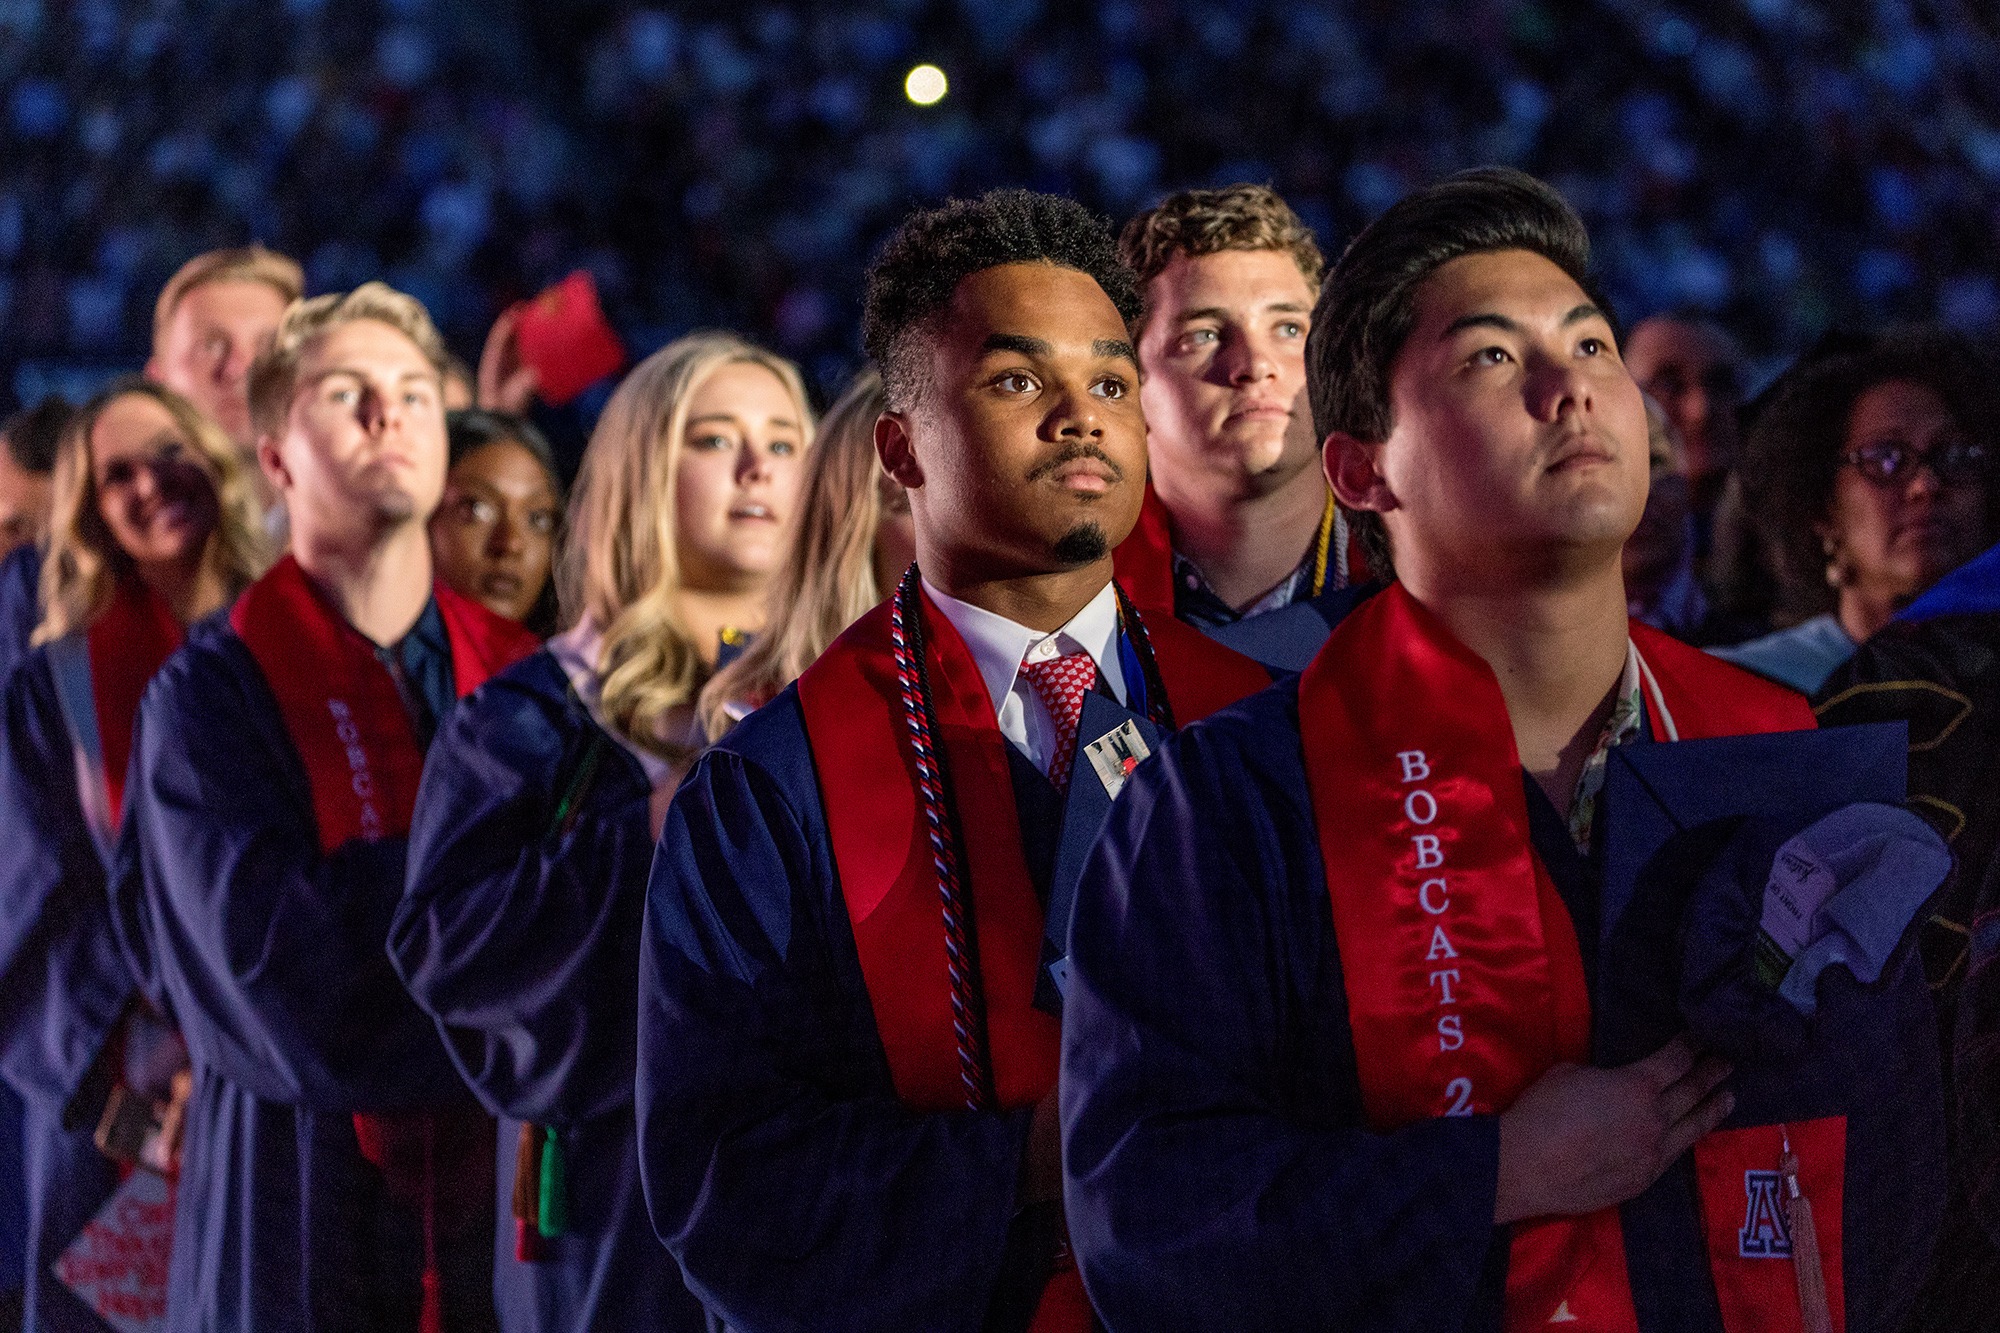 Group of students at Commencement ceremony